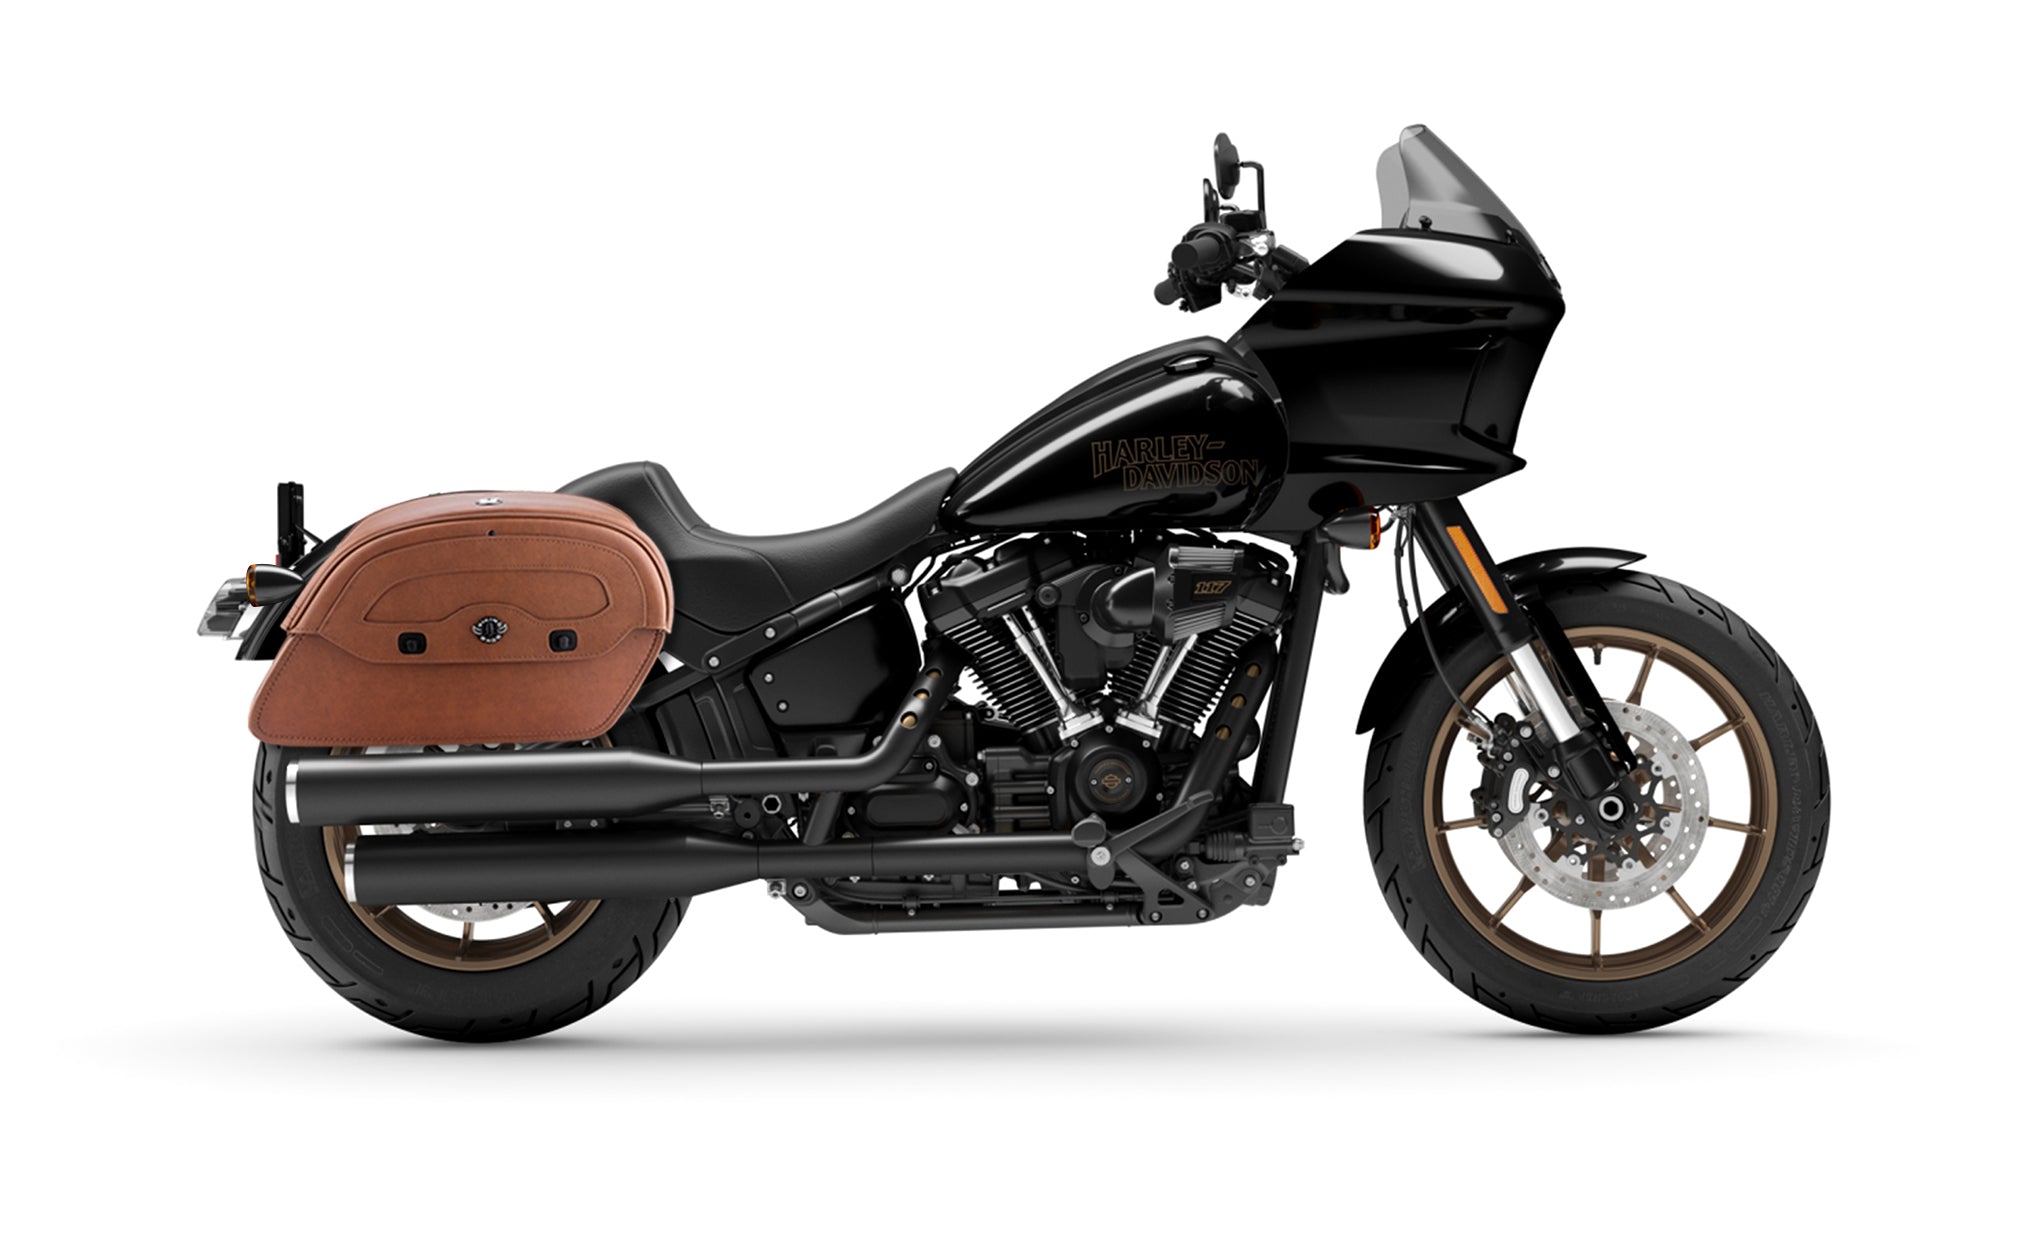 Viking Warrior Brown Large Leather Motorcycle Saddlebags For Harley Softail Low Rider ST FXLRST Bag on Bike View @expand